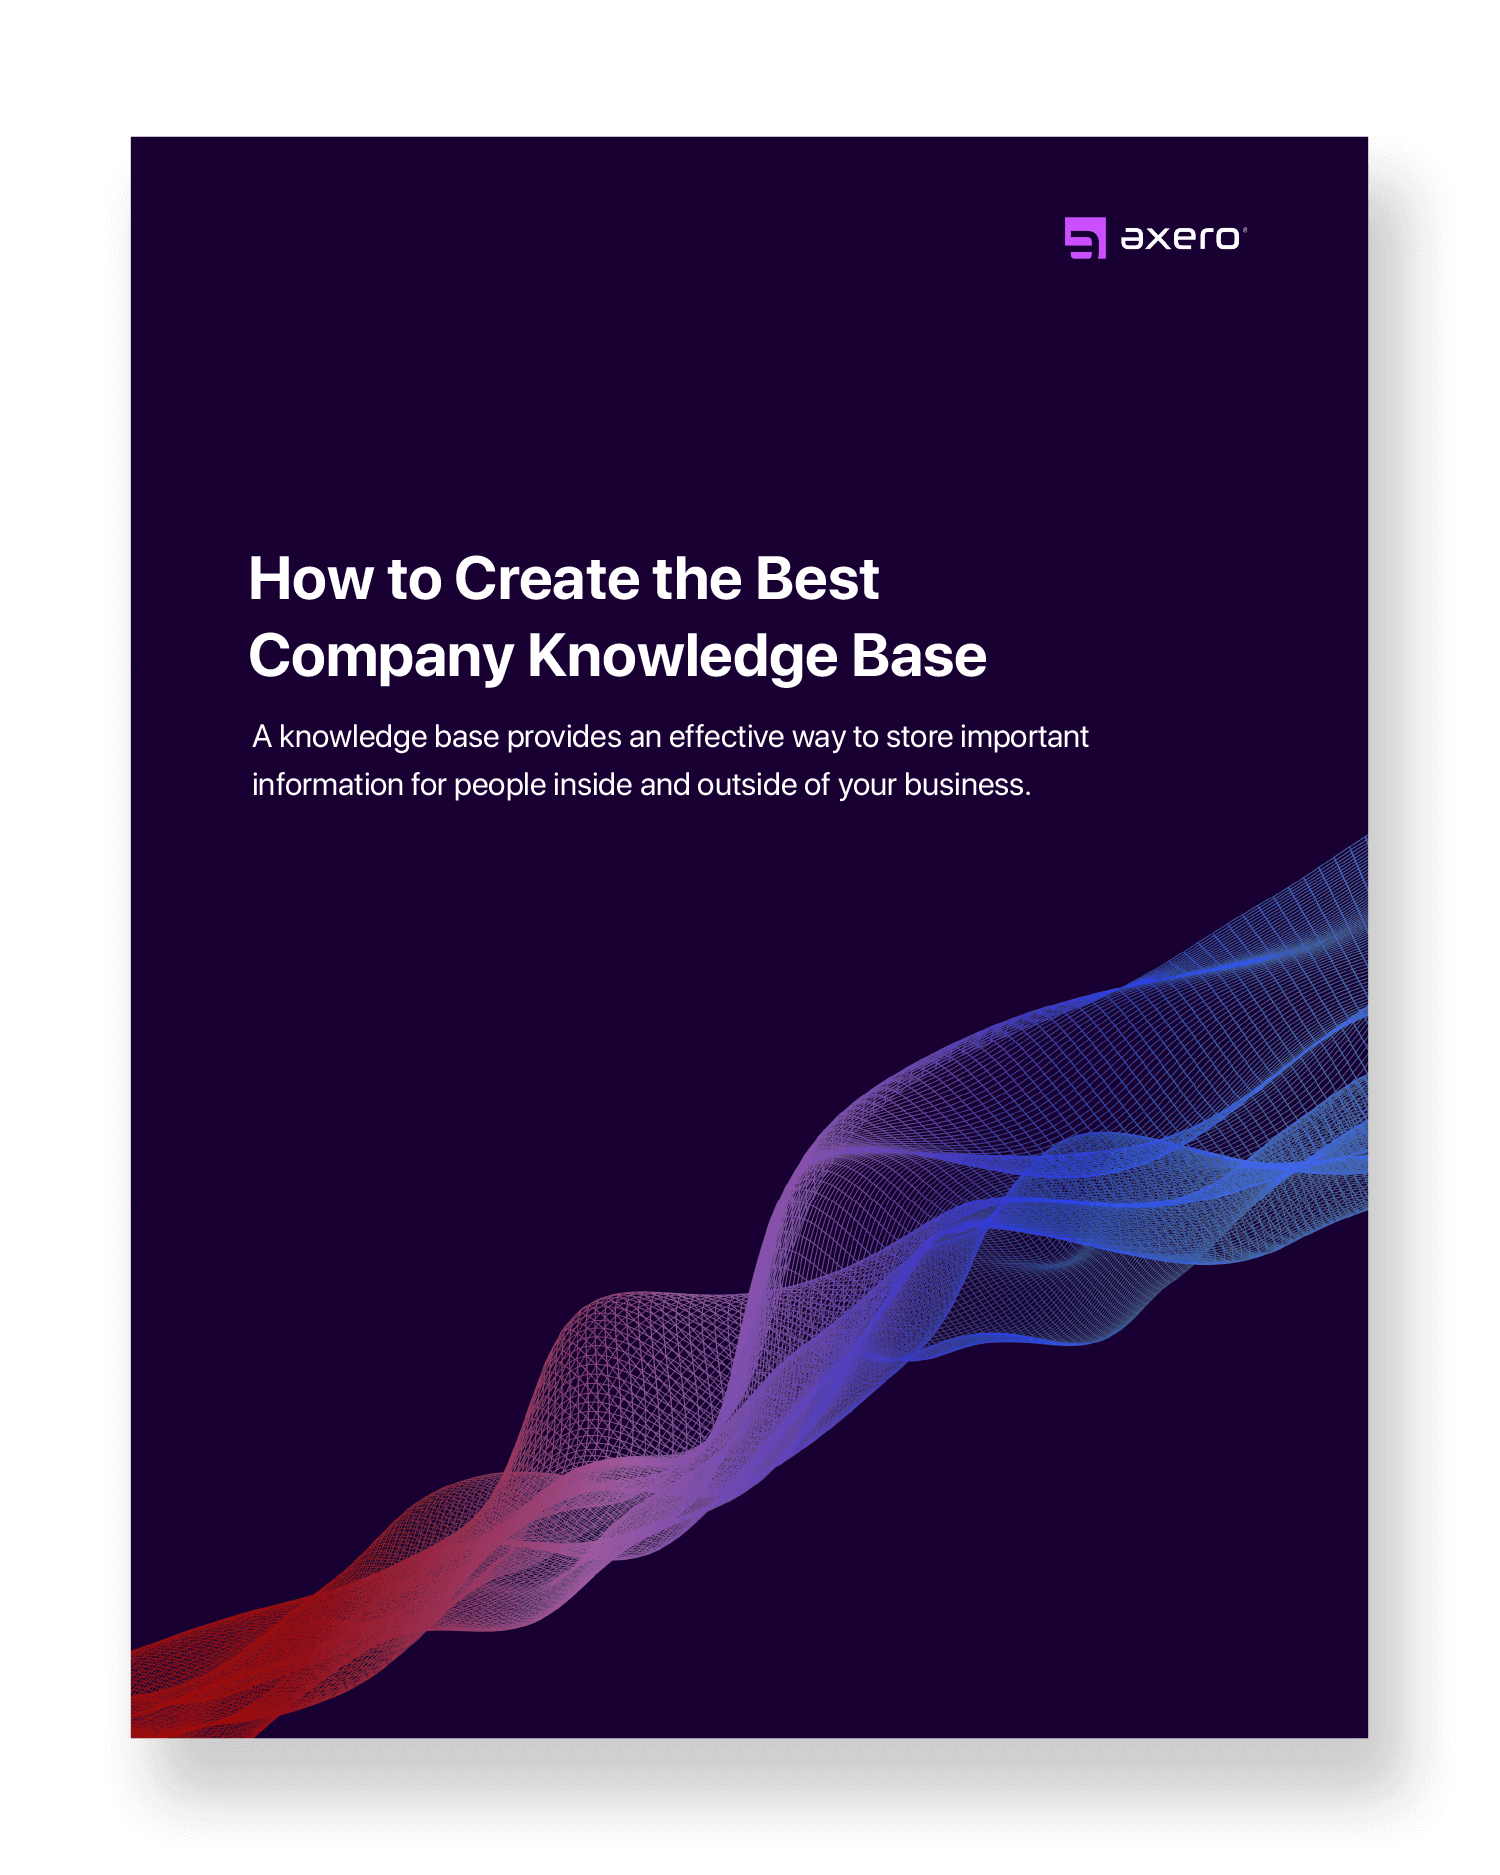  Essentials to Creating a Relevant Knowledge Base for Your Company